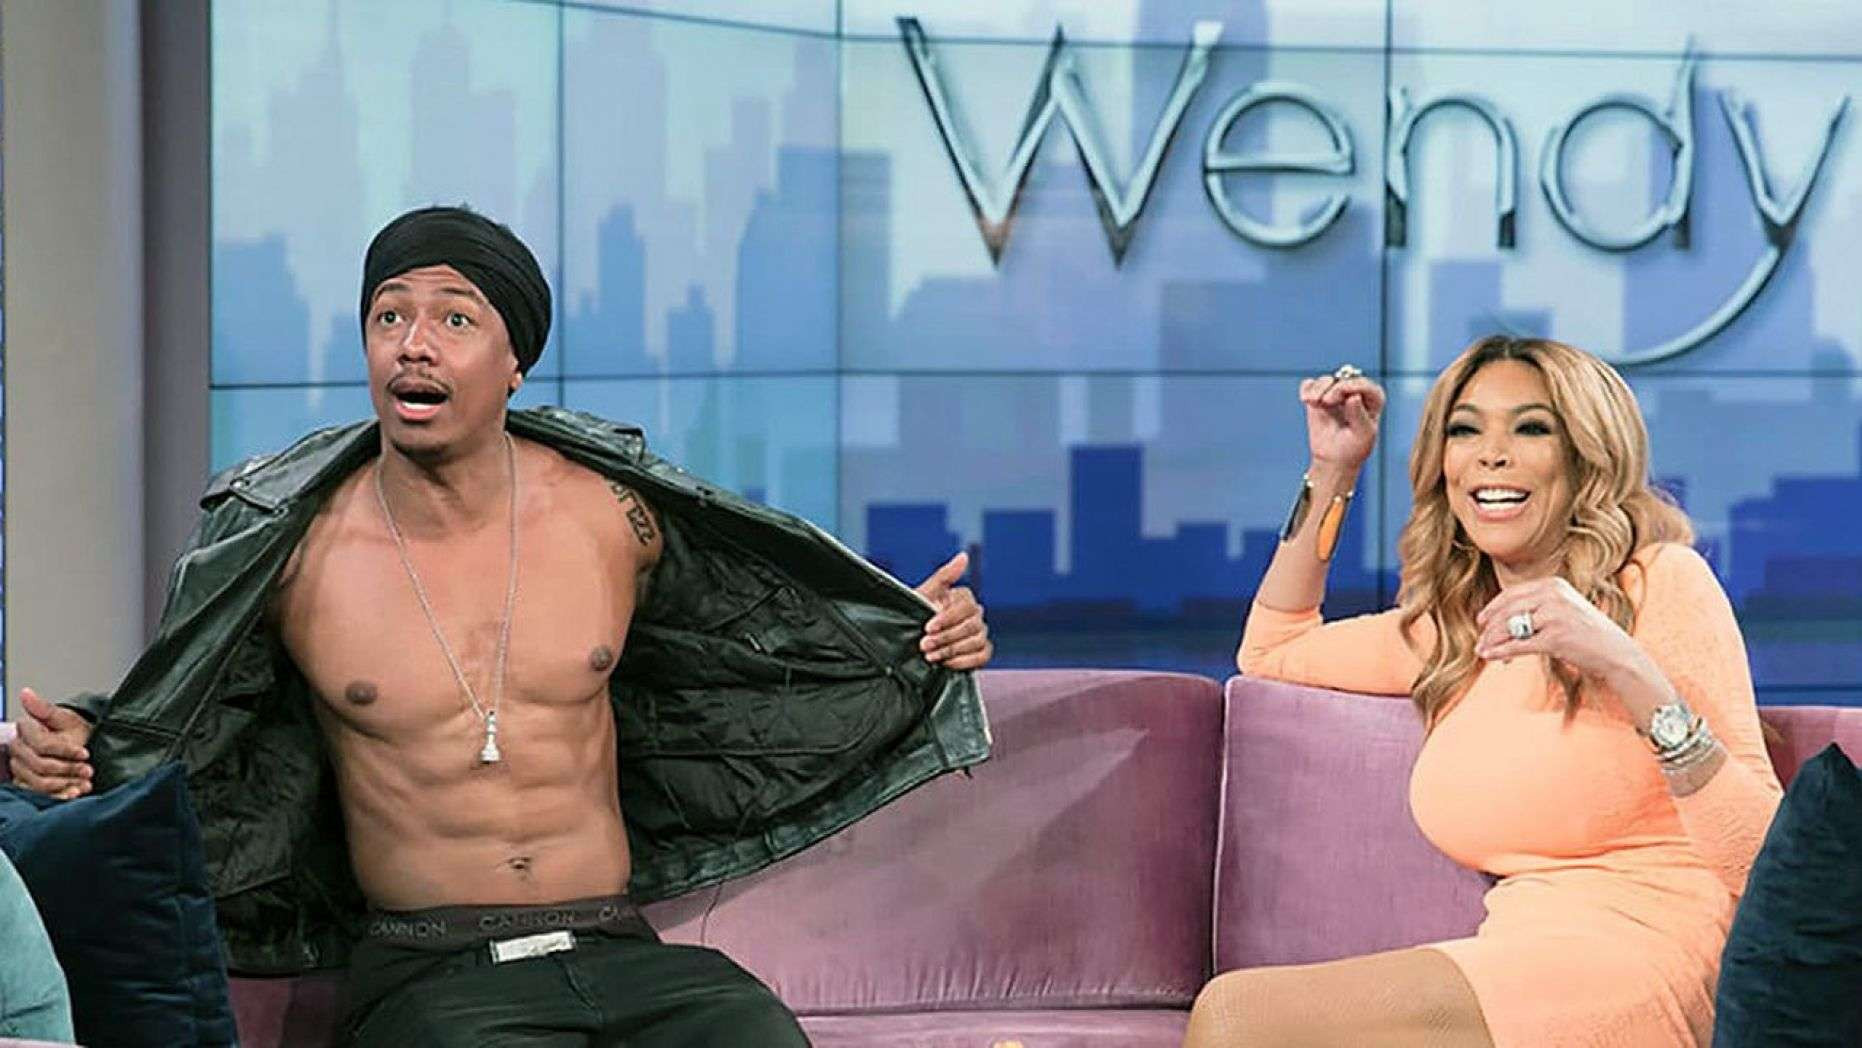 Nick Cannon To Host Wendy Williams’ Talk Show While She Recovers